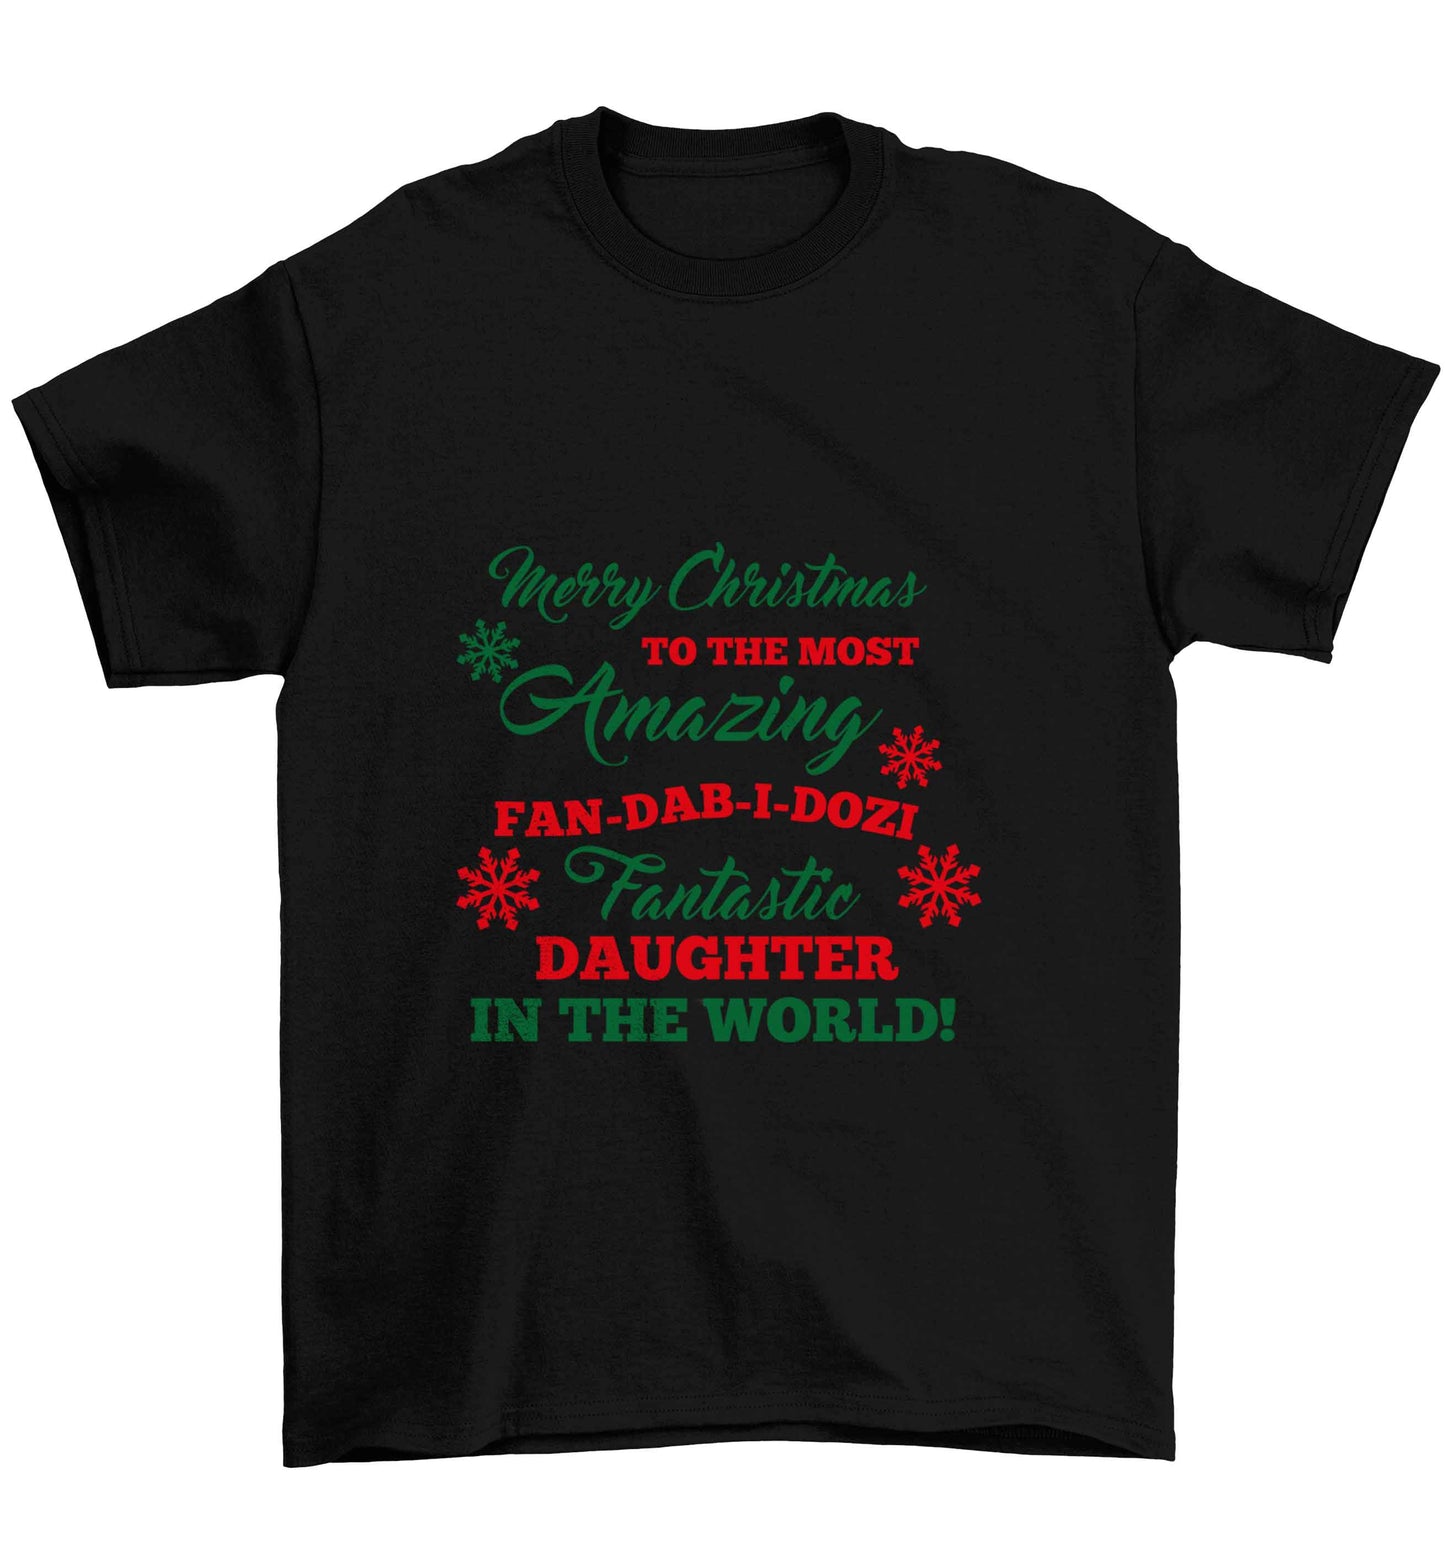 Merry Christmas to the most amazing fan-dab-i-dozi fantasic Daughter in the world Children's black Tshirt 12-13 Years